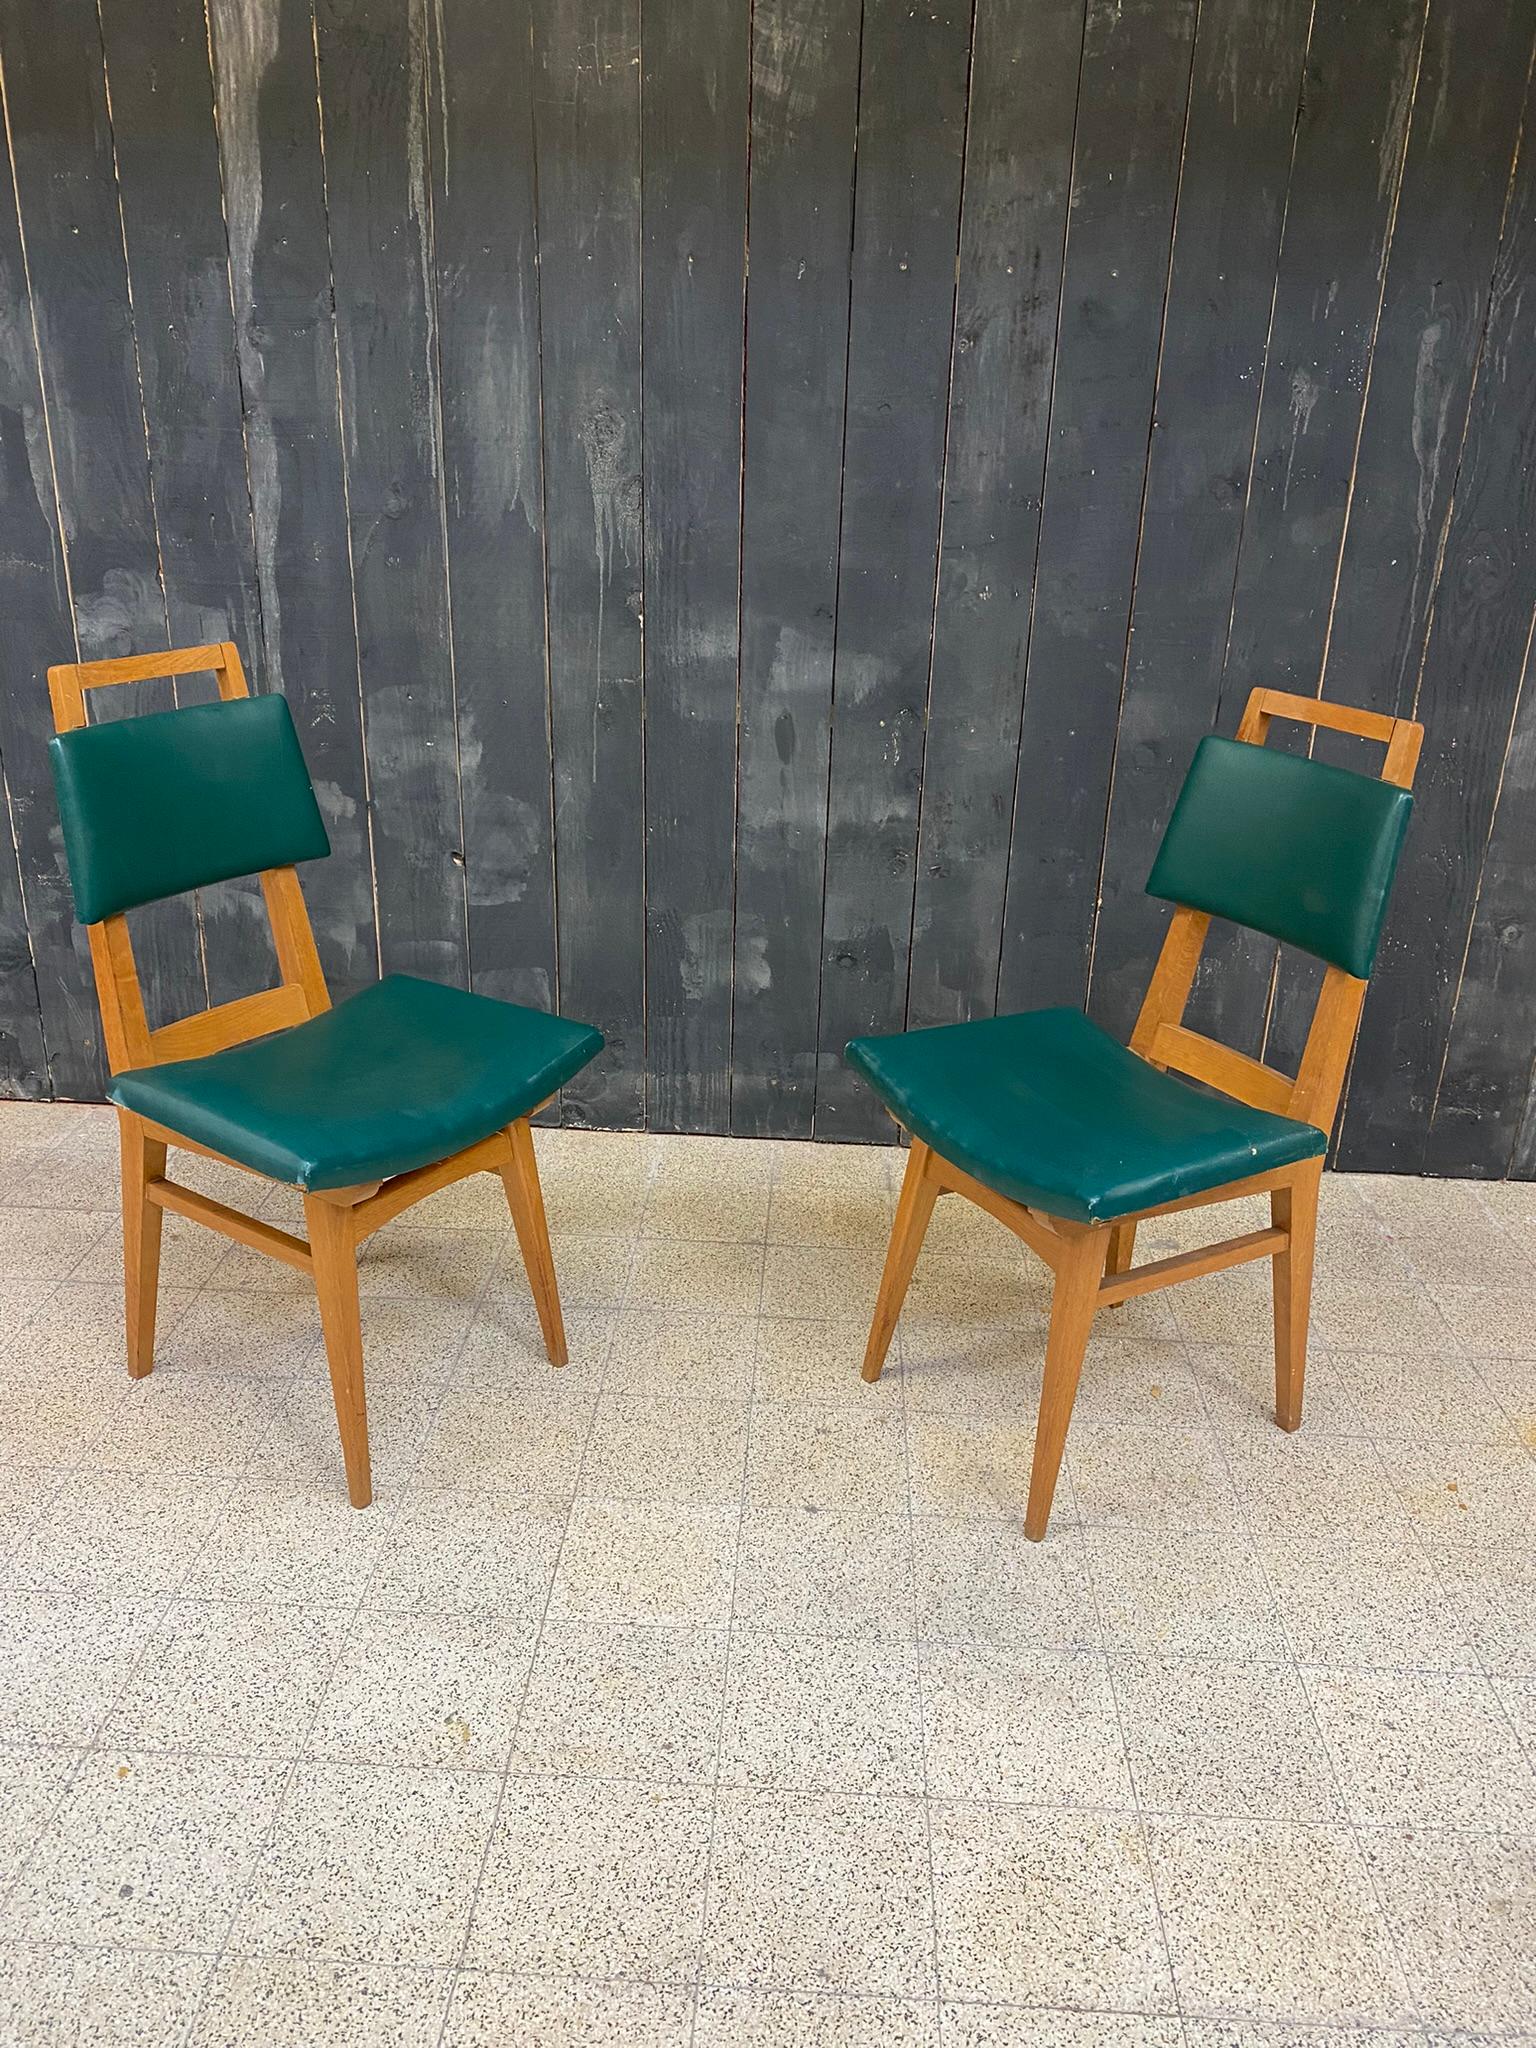 20th Century Suite of 6 Oak Chairs, France circa 1950/1960 